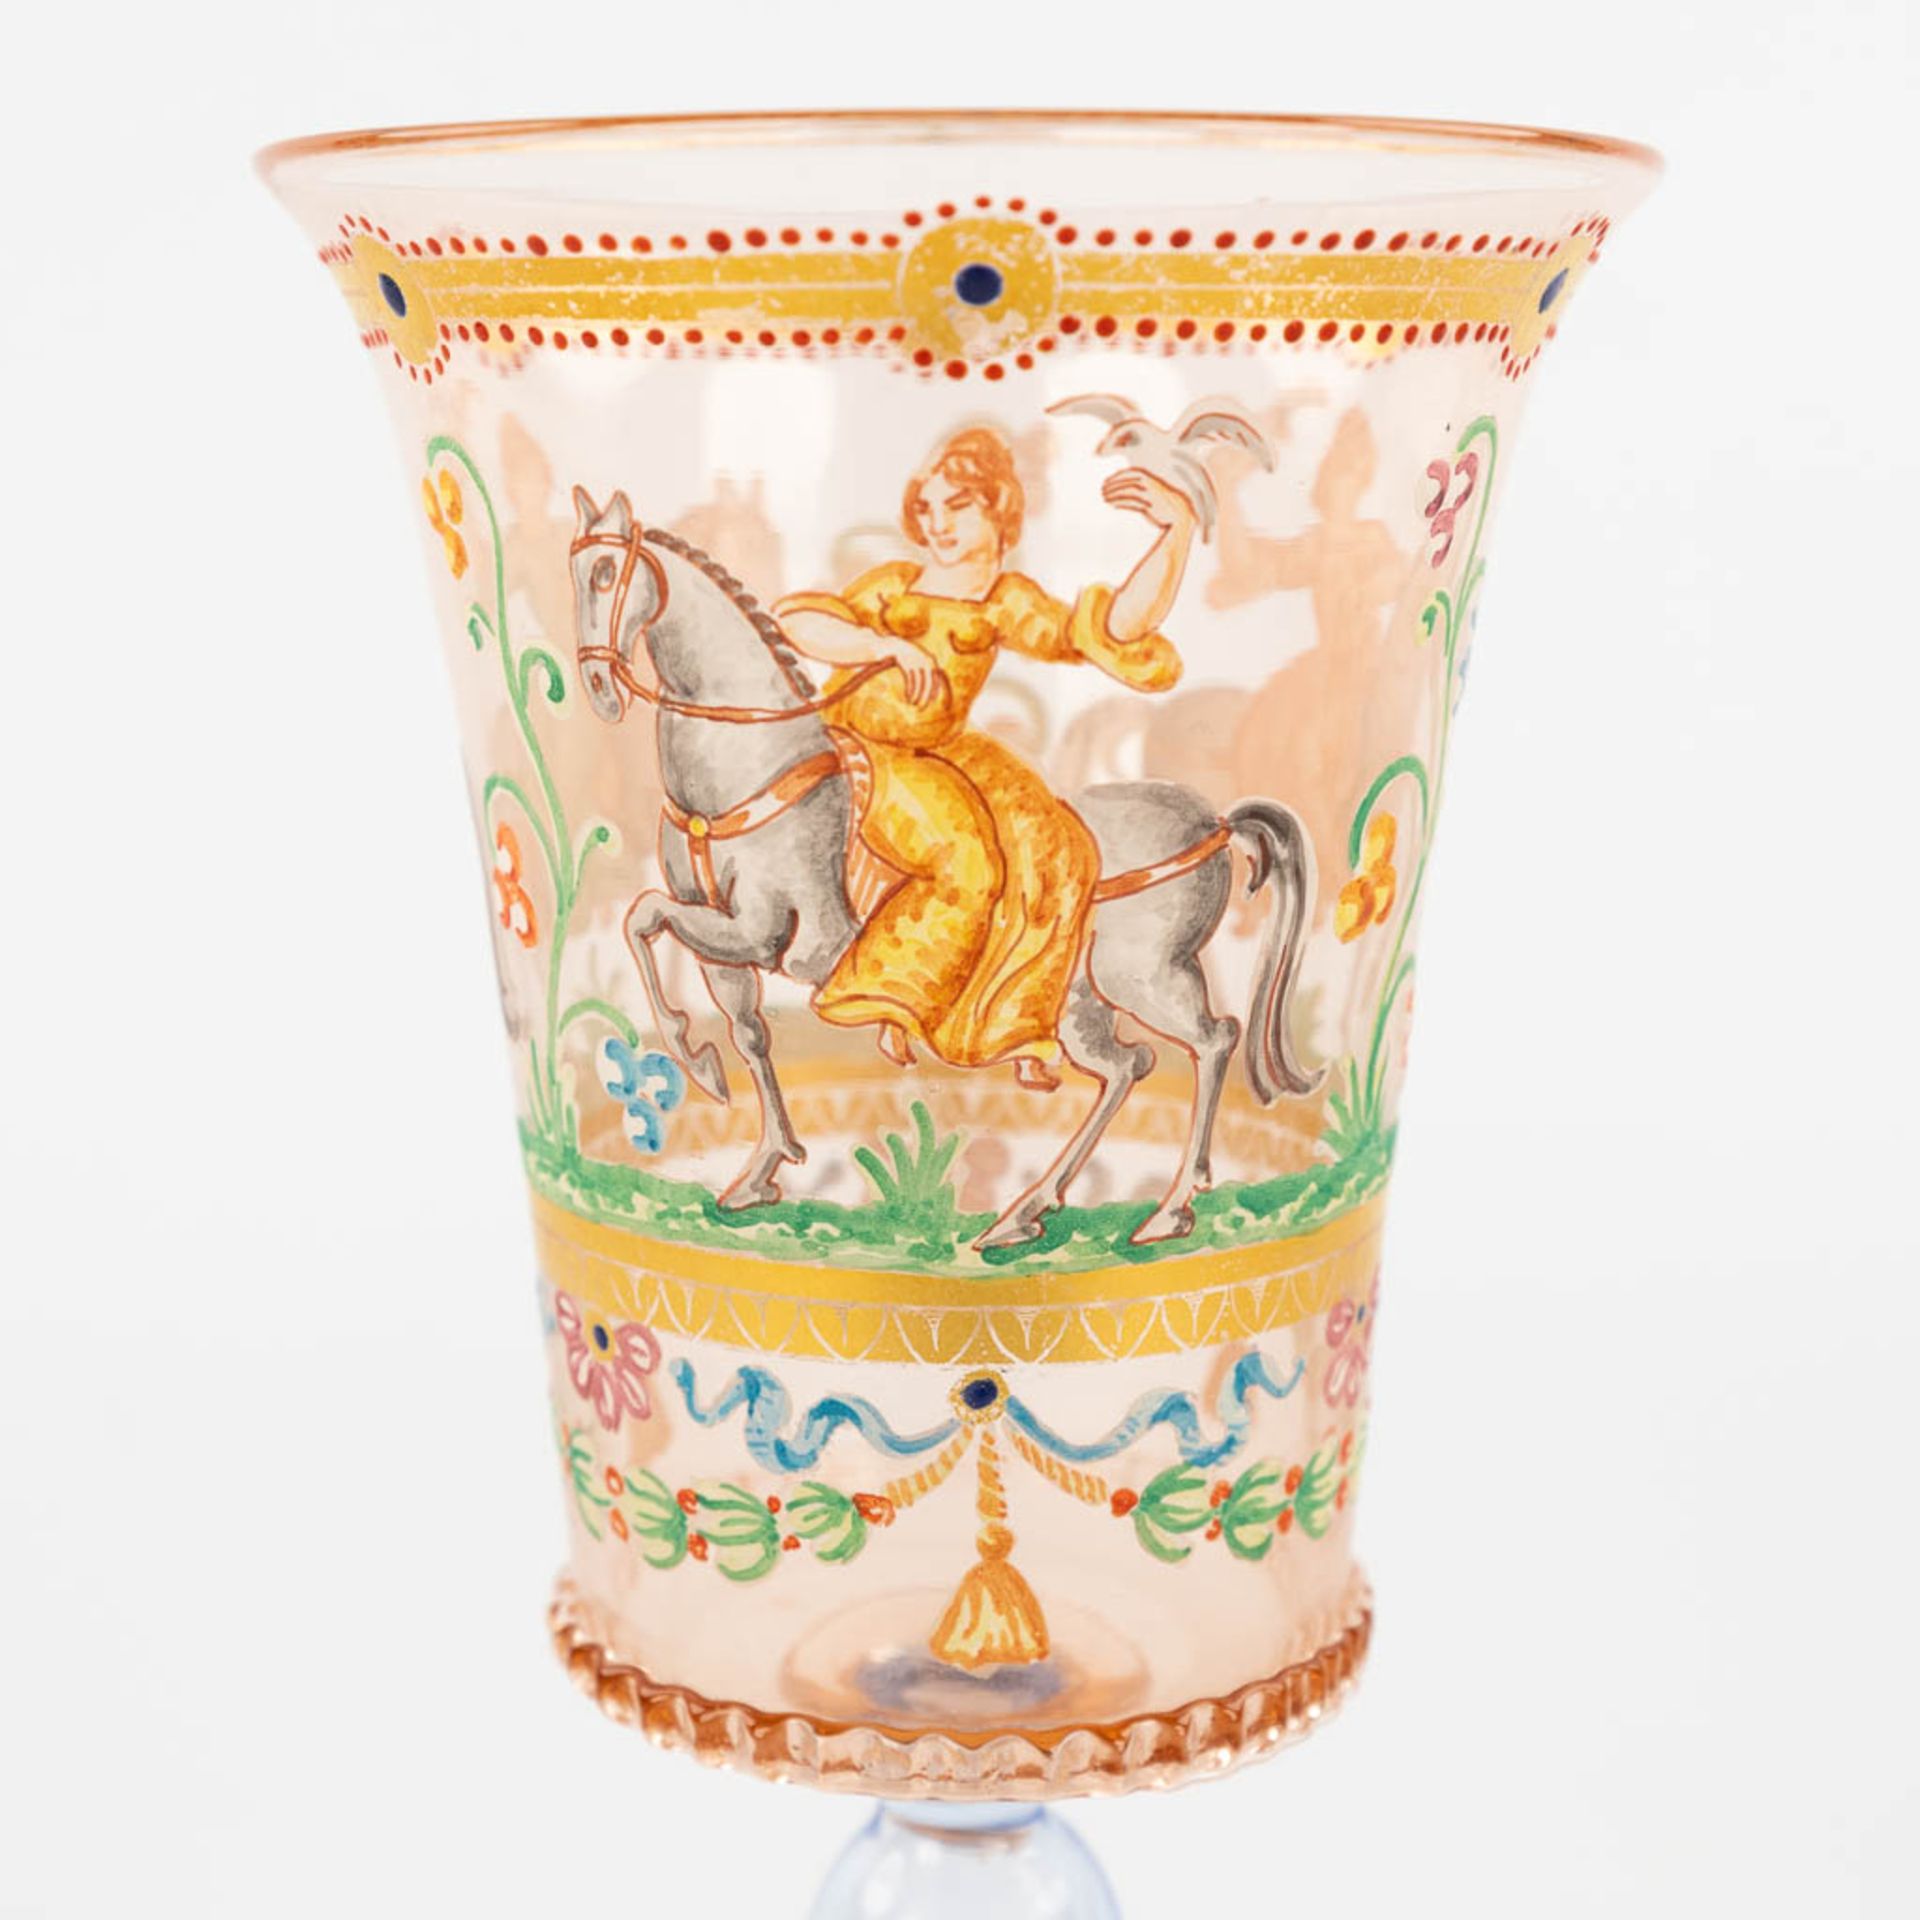 A set of 4 hand-painted and antique goblets, Murano, Salviati, 19th C. (H:17 x D:7 cm) - Image 10 of 16